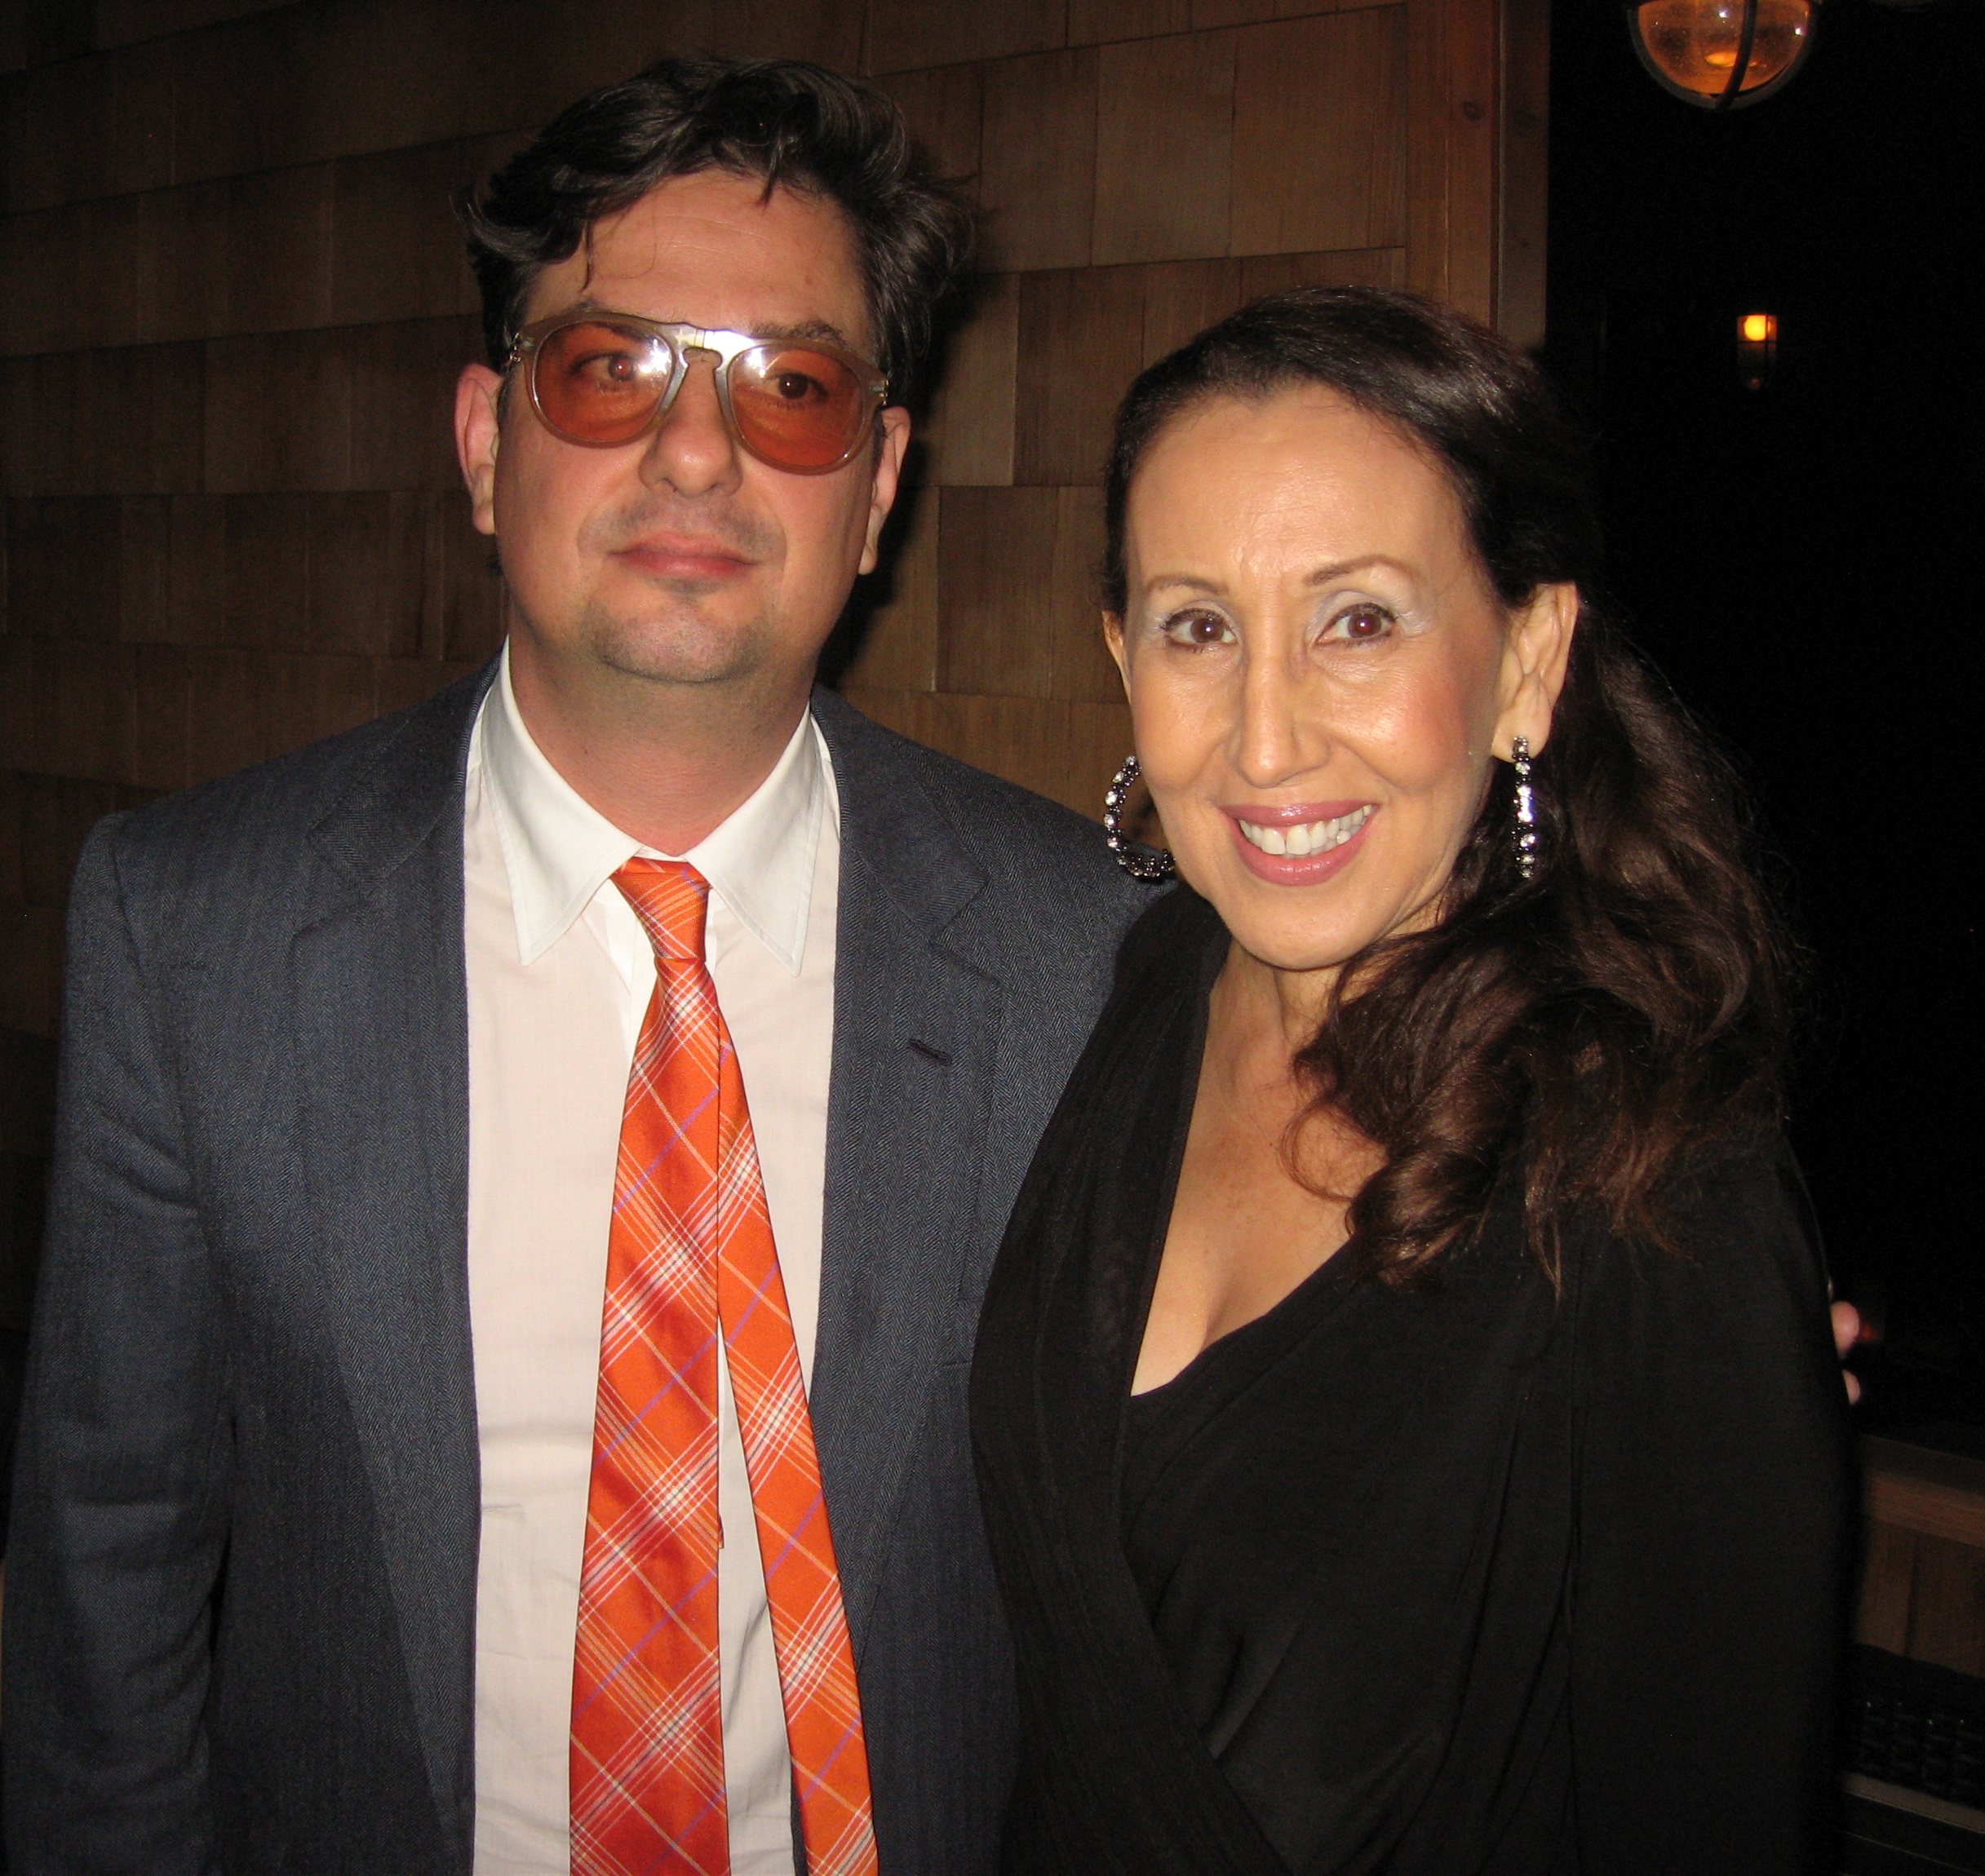 Gloria Laino and Roman Coppola at event of A Glimpse Inside the Mind of Charles Swan III